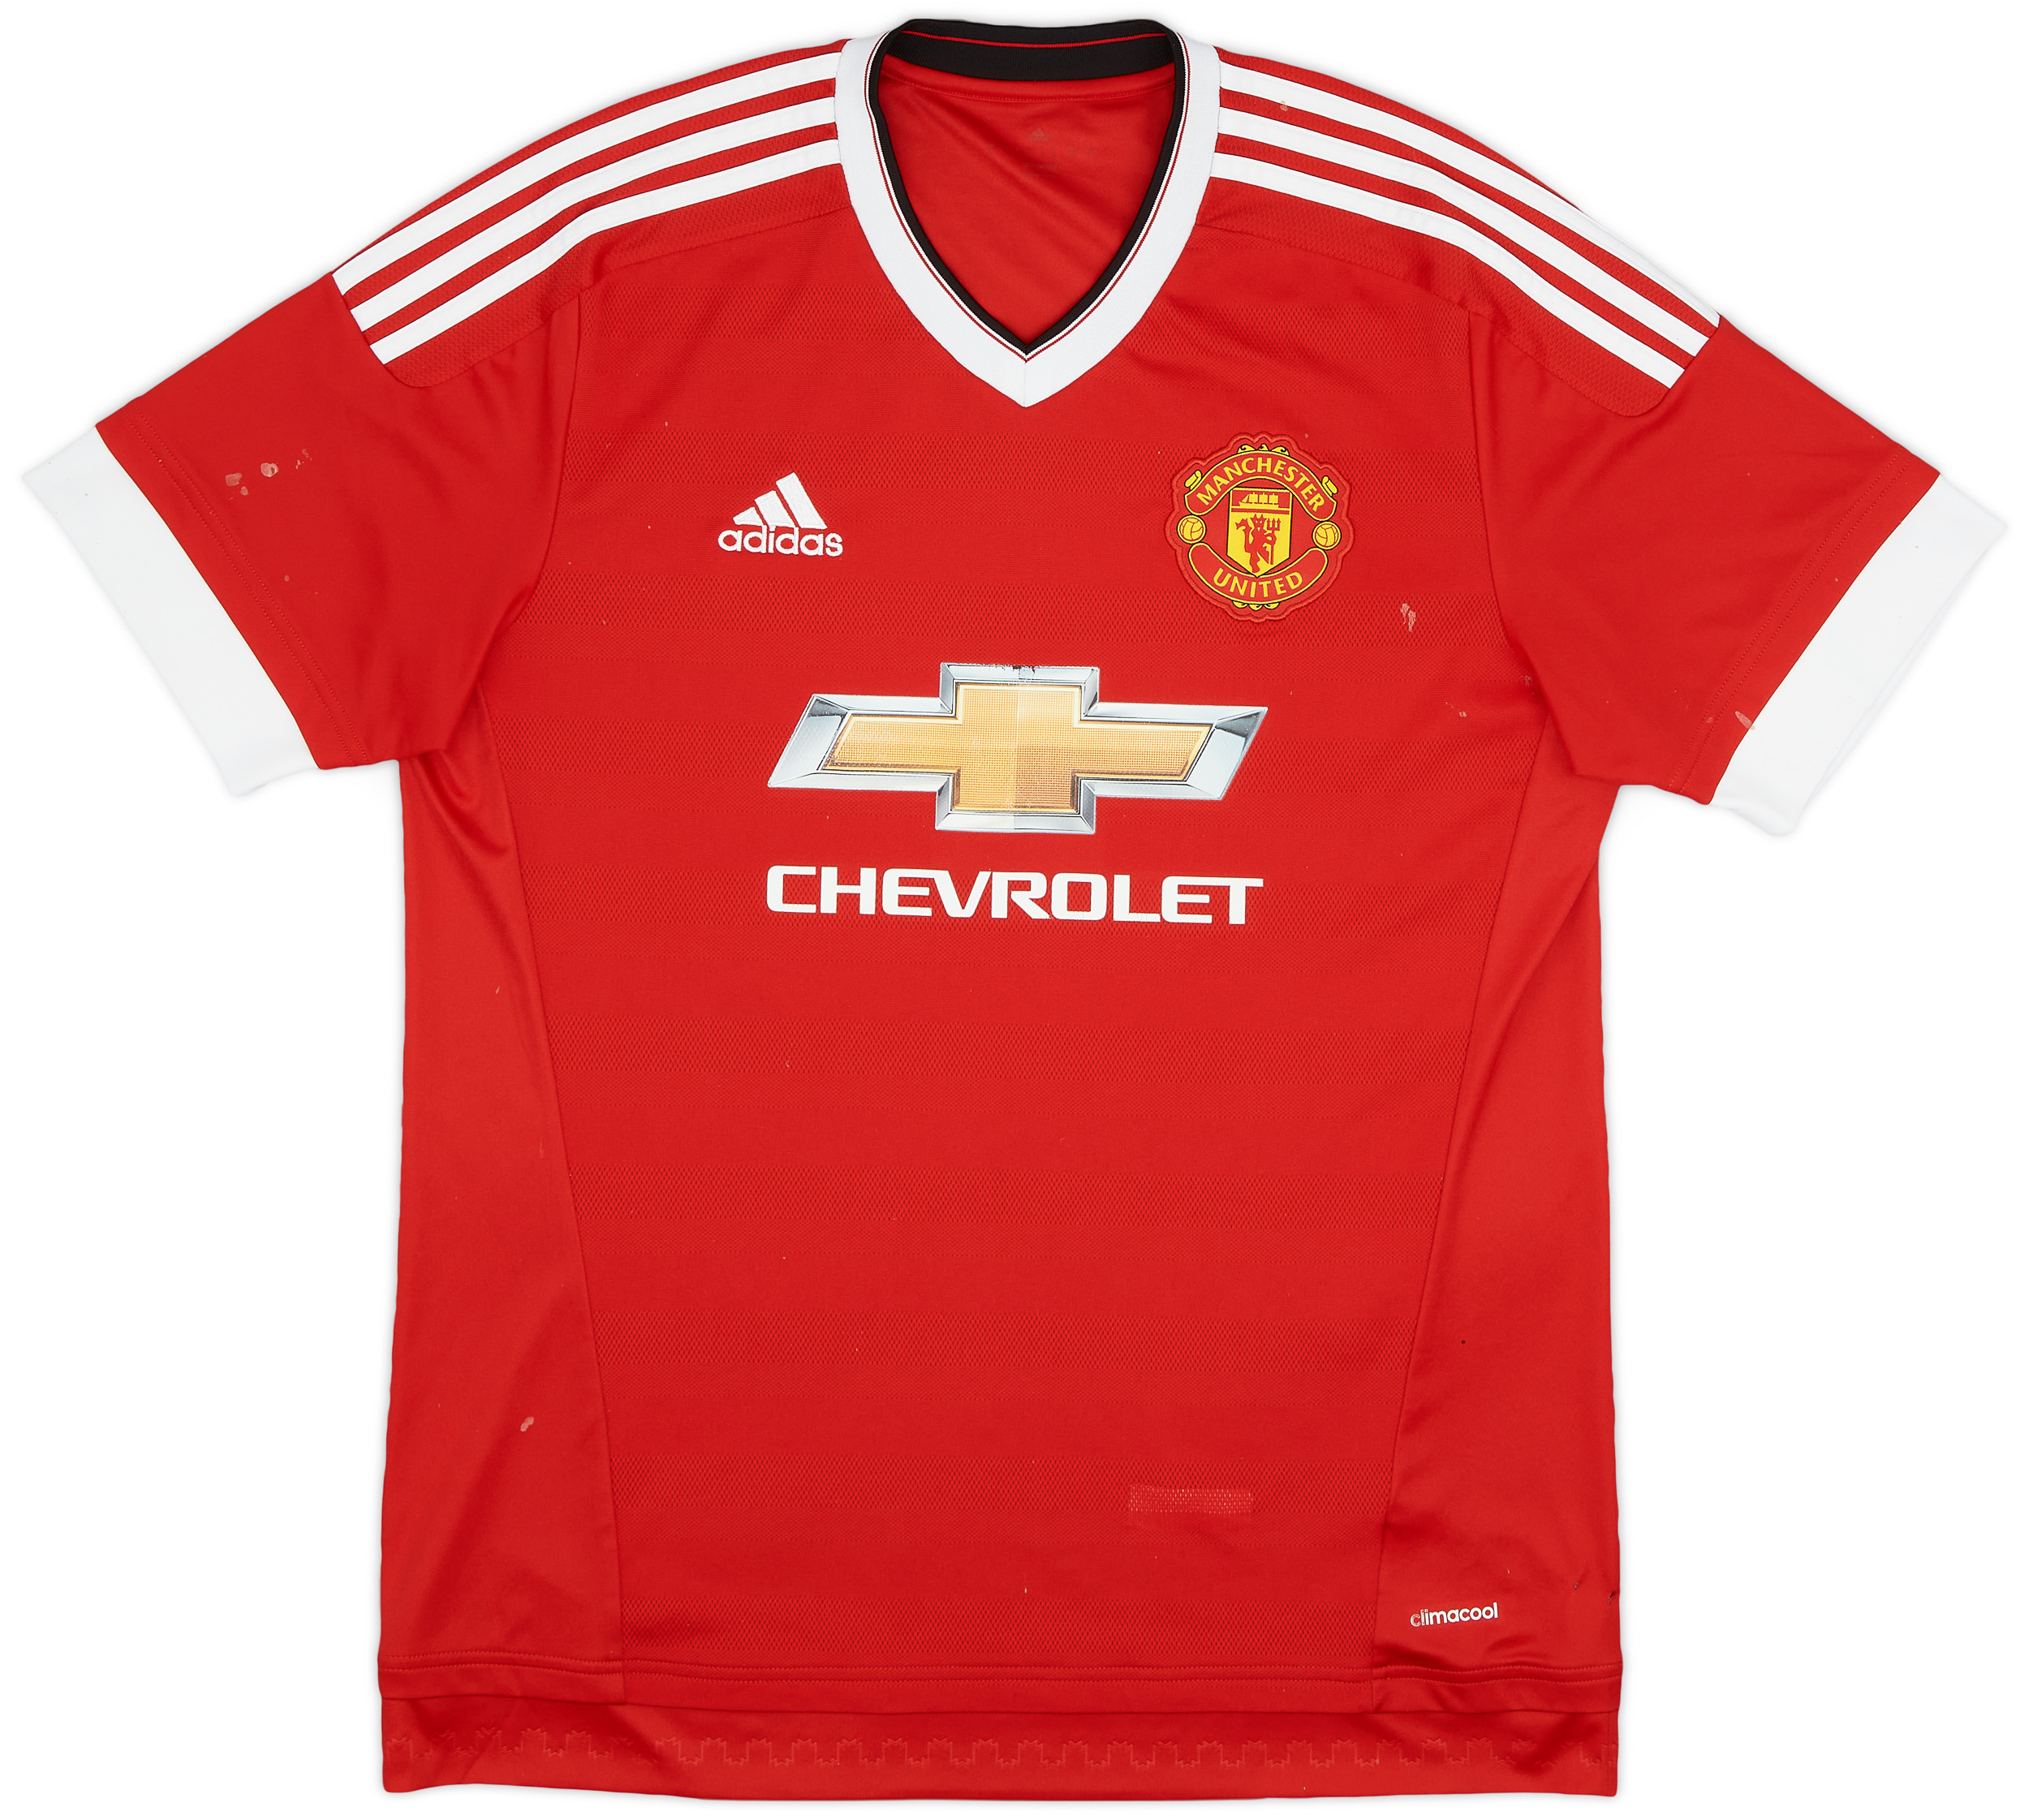 2015-16 Manchester United Home Shirt - 4/10 - ()